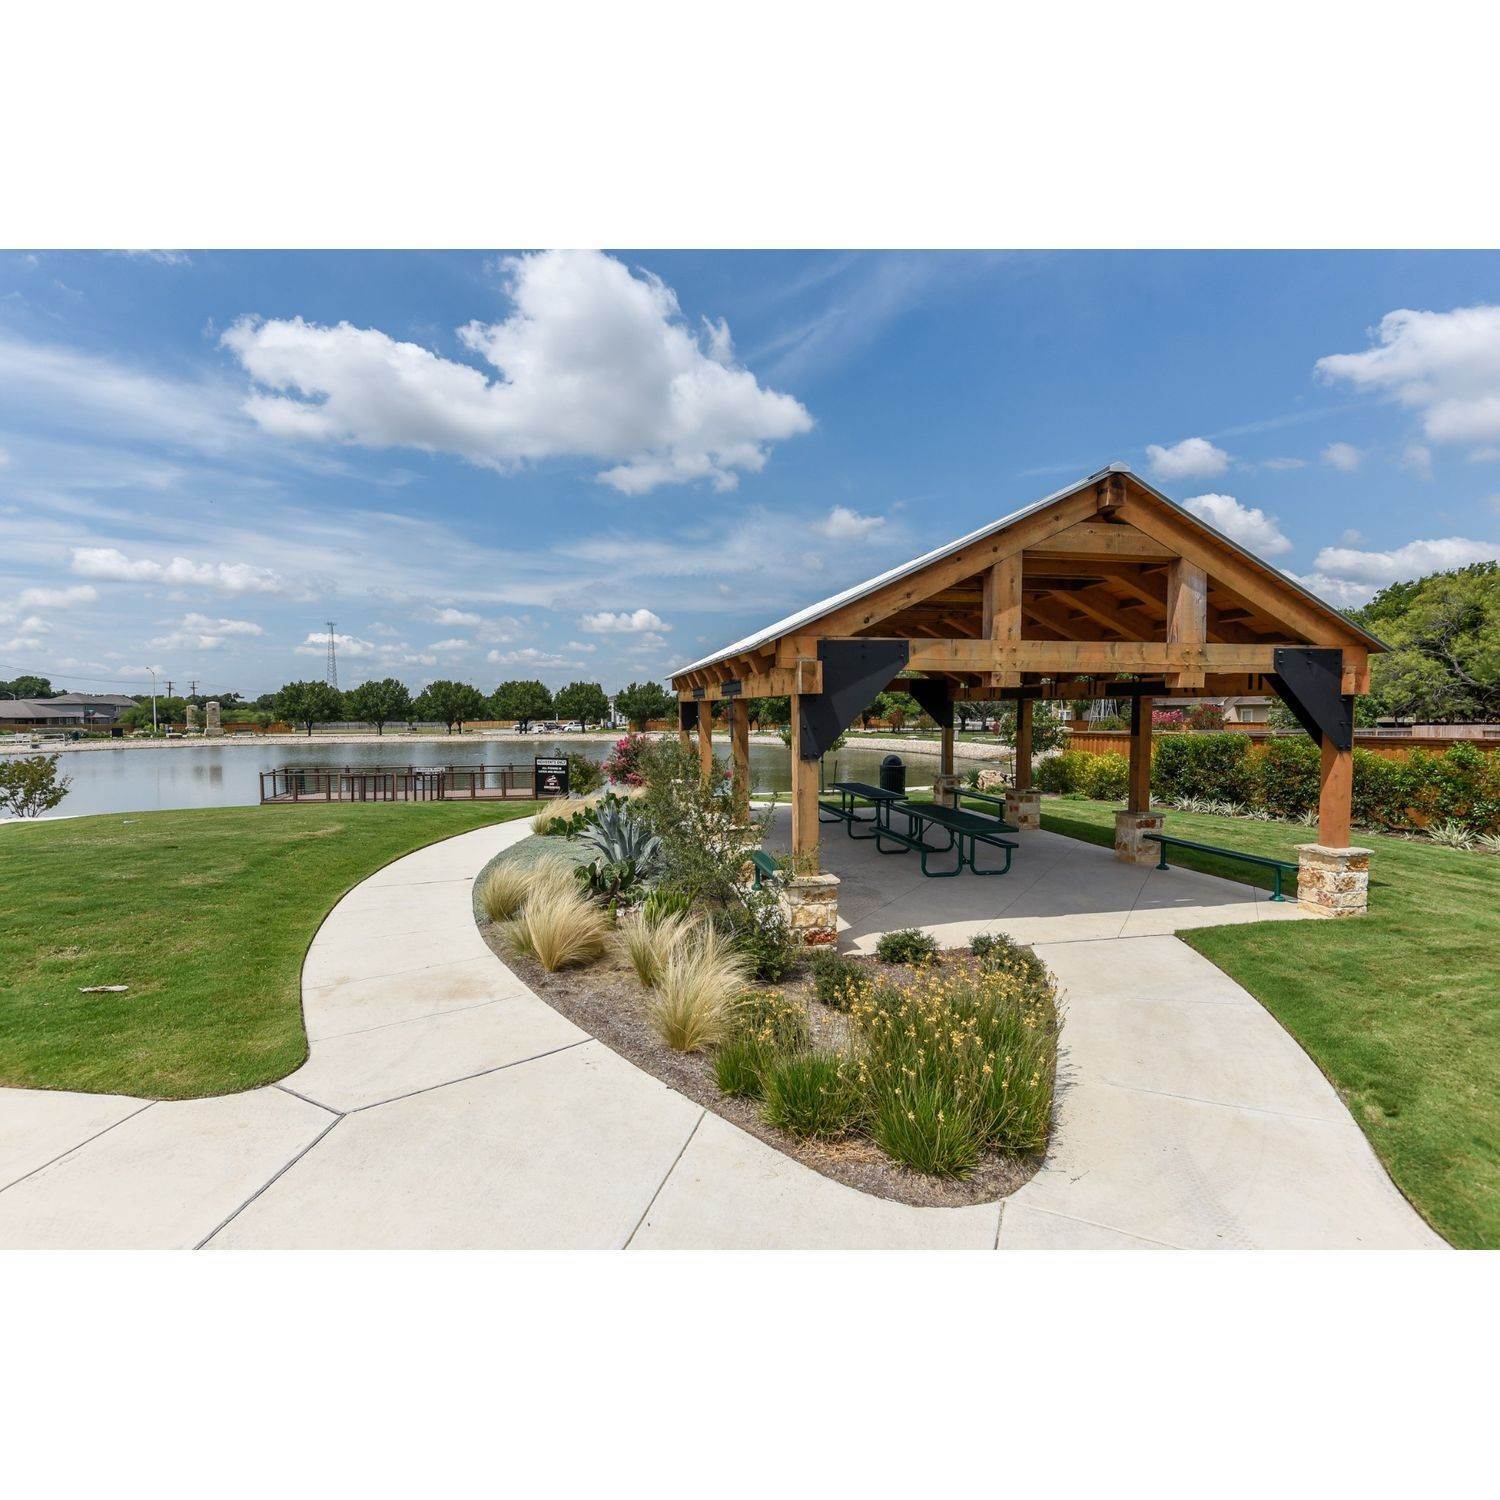 17. Wasser Ranch building at 917 Rench, New Braunfels, TX 78130